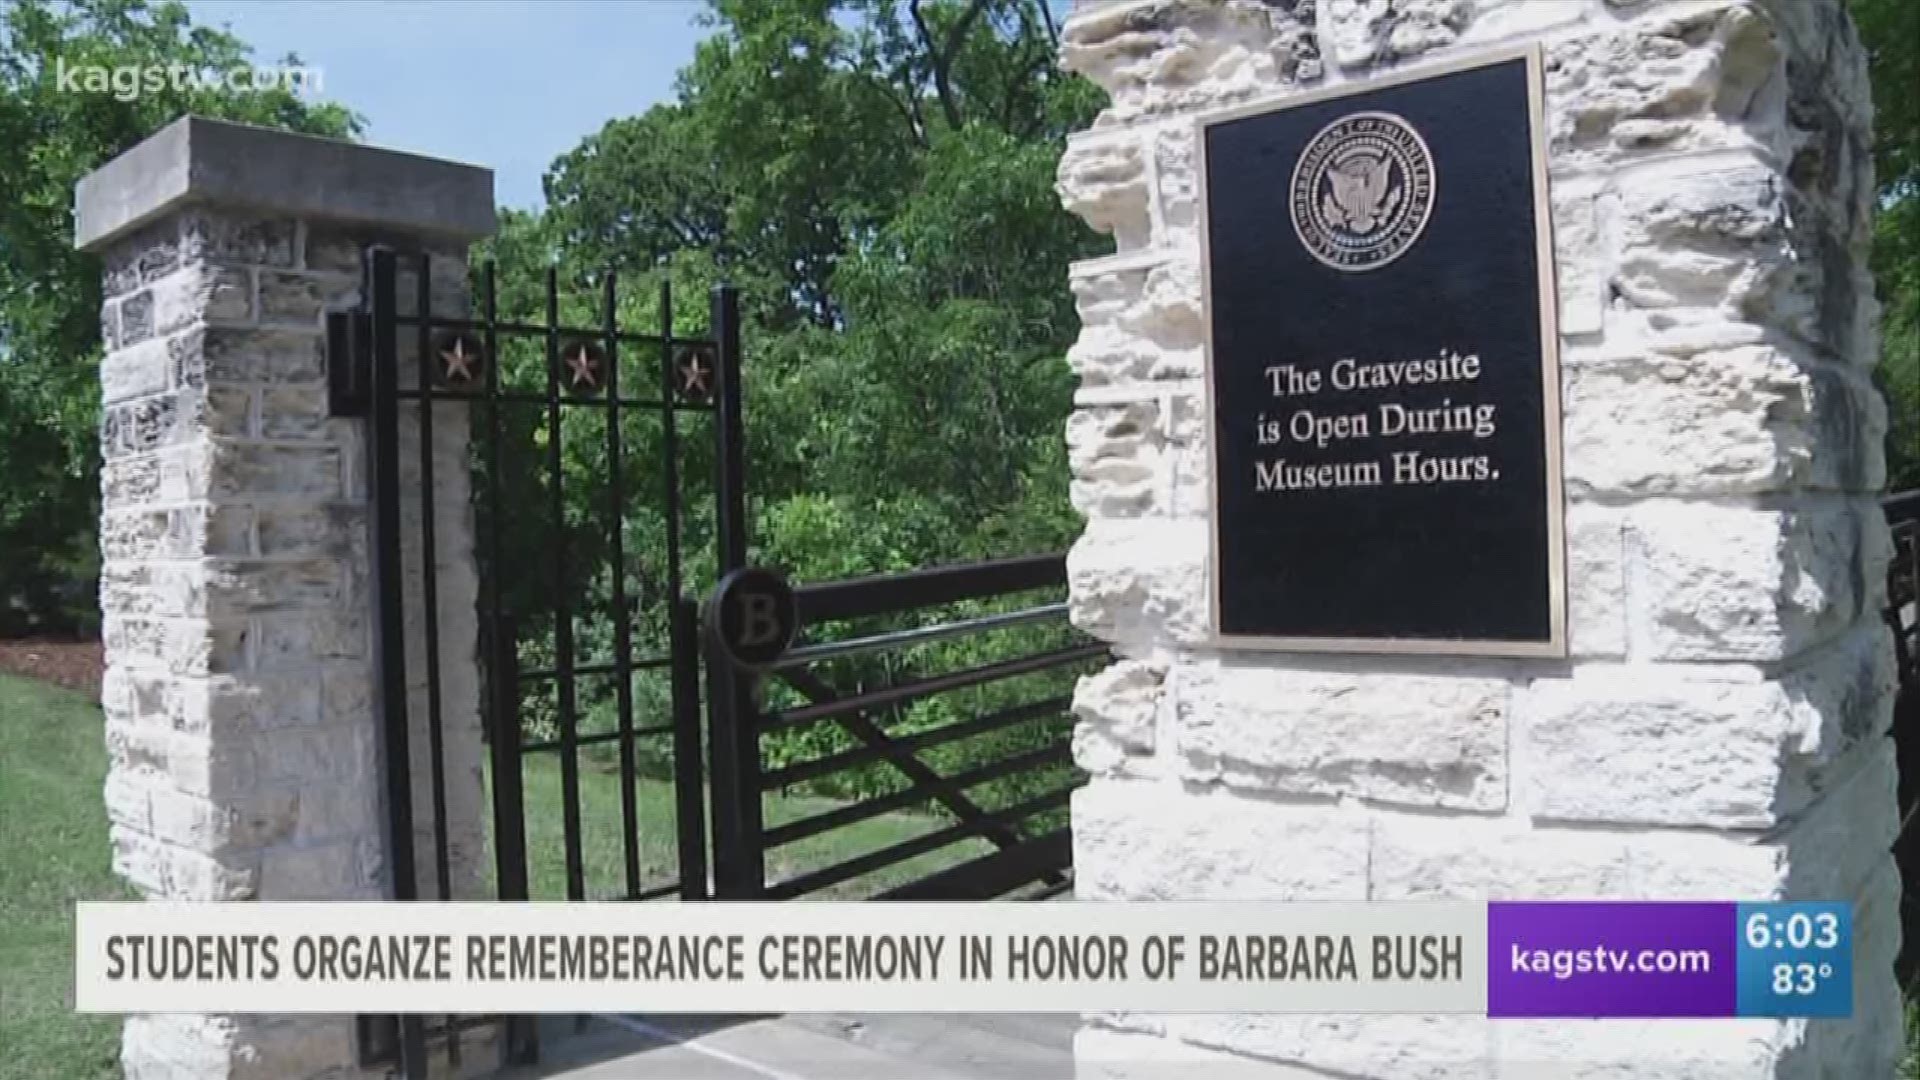 A group of Texas A&M students will continue to honor that legacy with a remembrance ceremony.